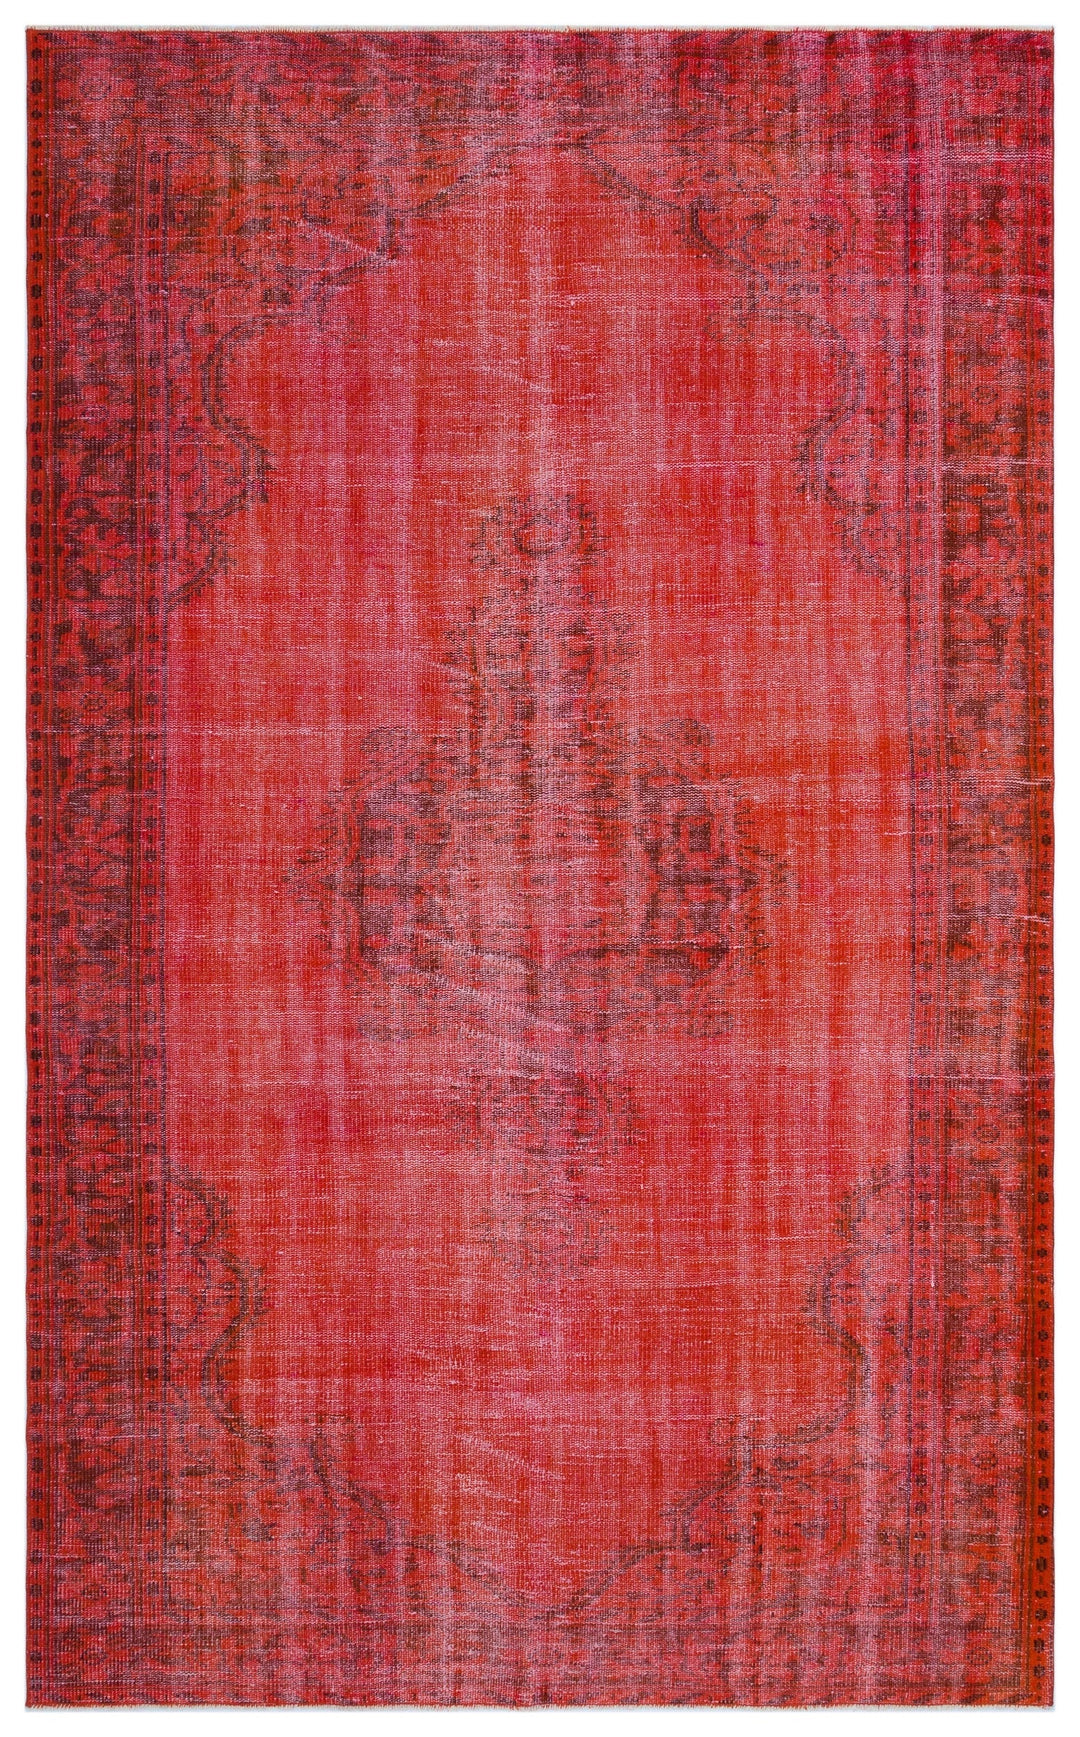 Athens Red Tumbled Wool Hand Woven Carpet 179 x 291